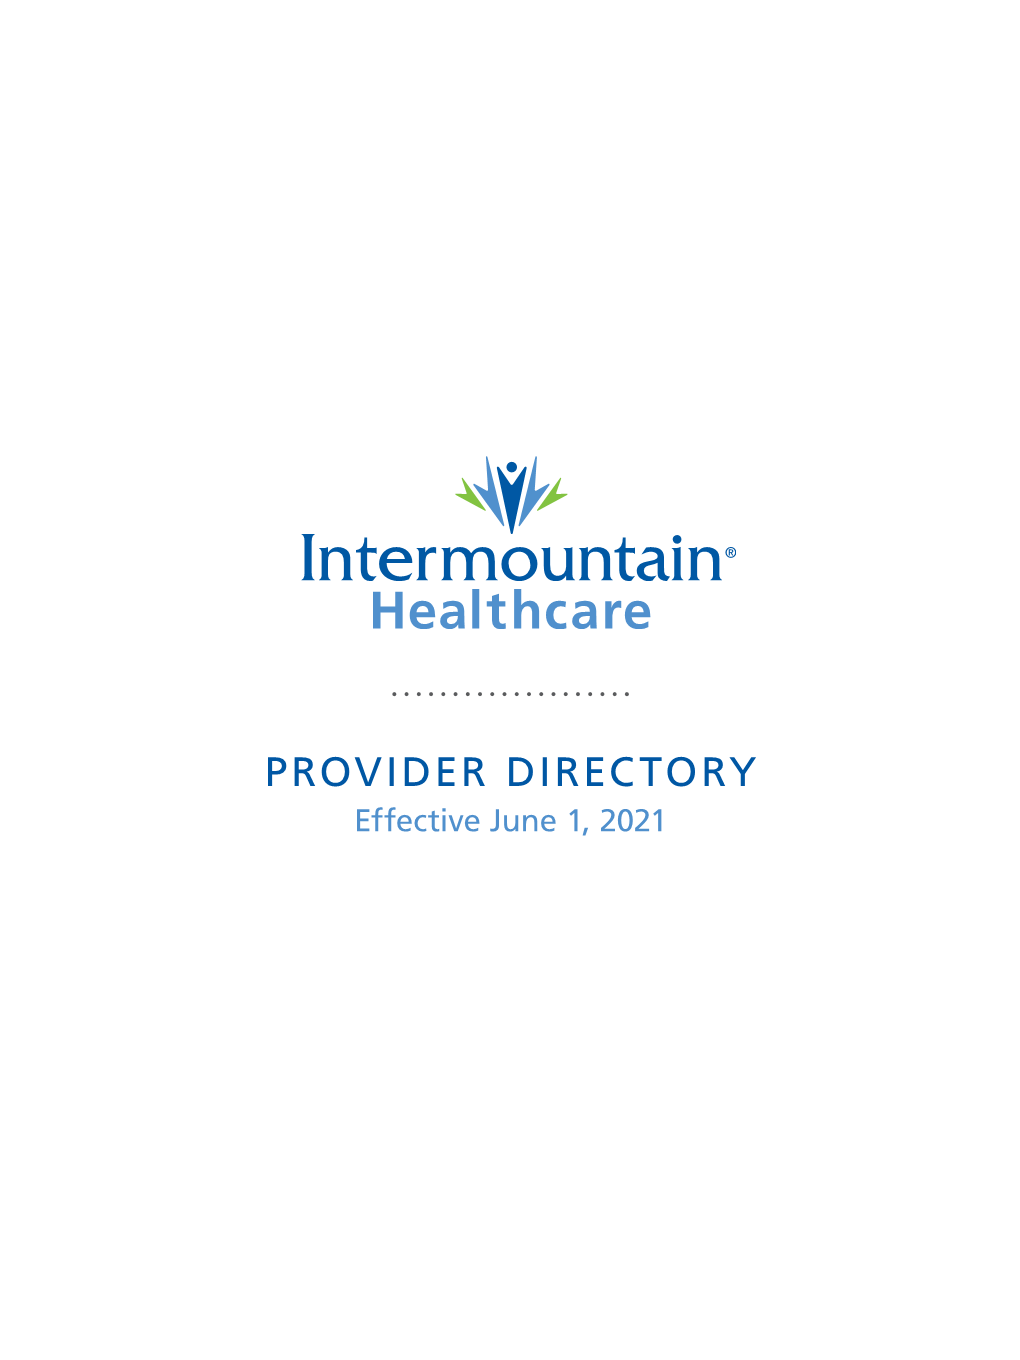 PROVIDER DIRECTORY Effective June 1, 2021 Table of Contents